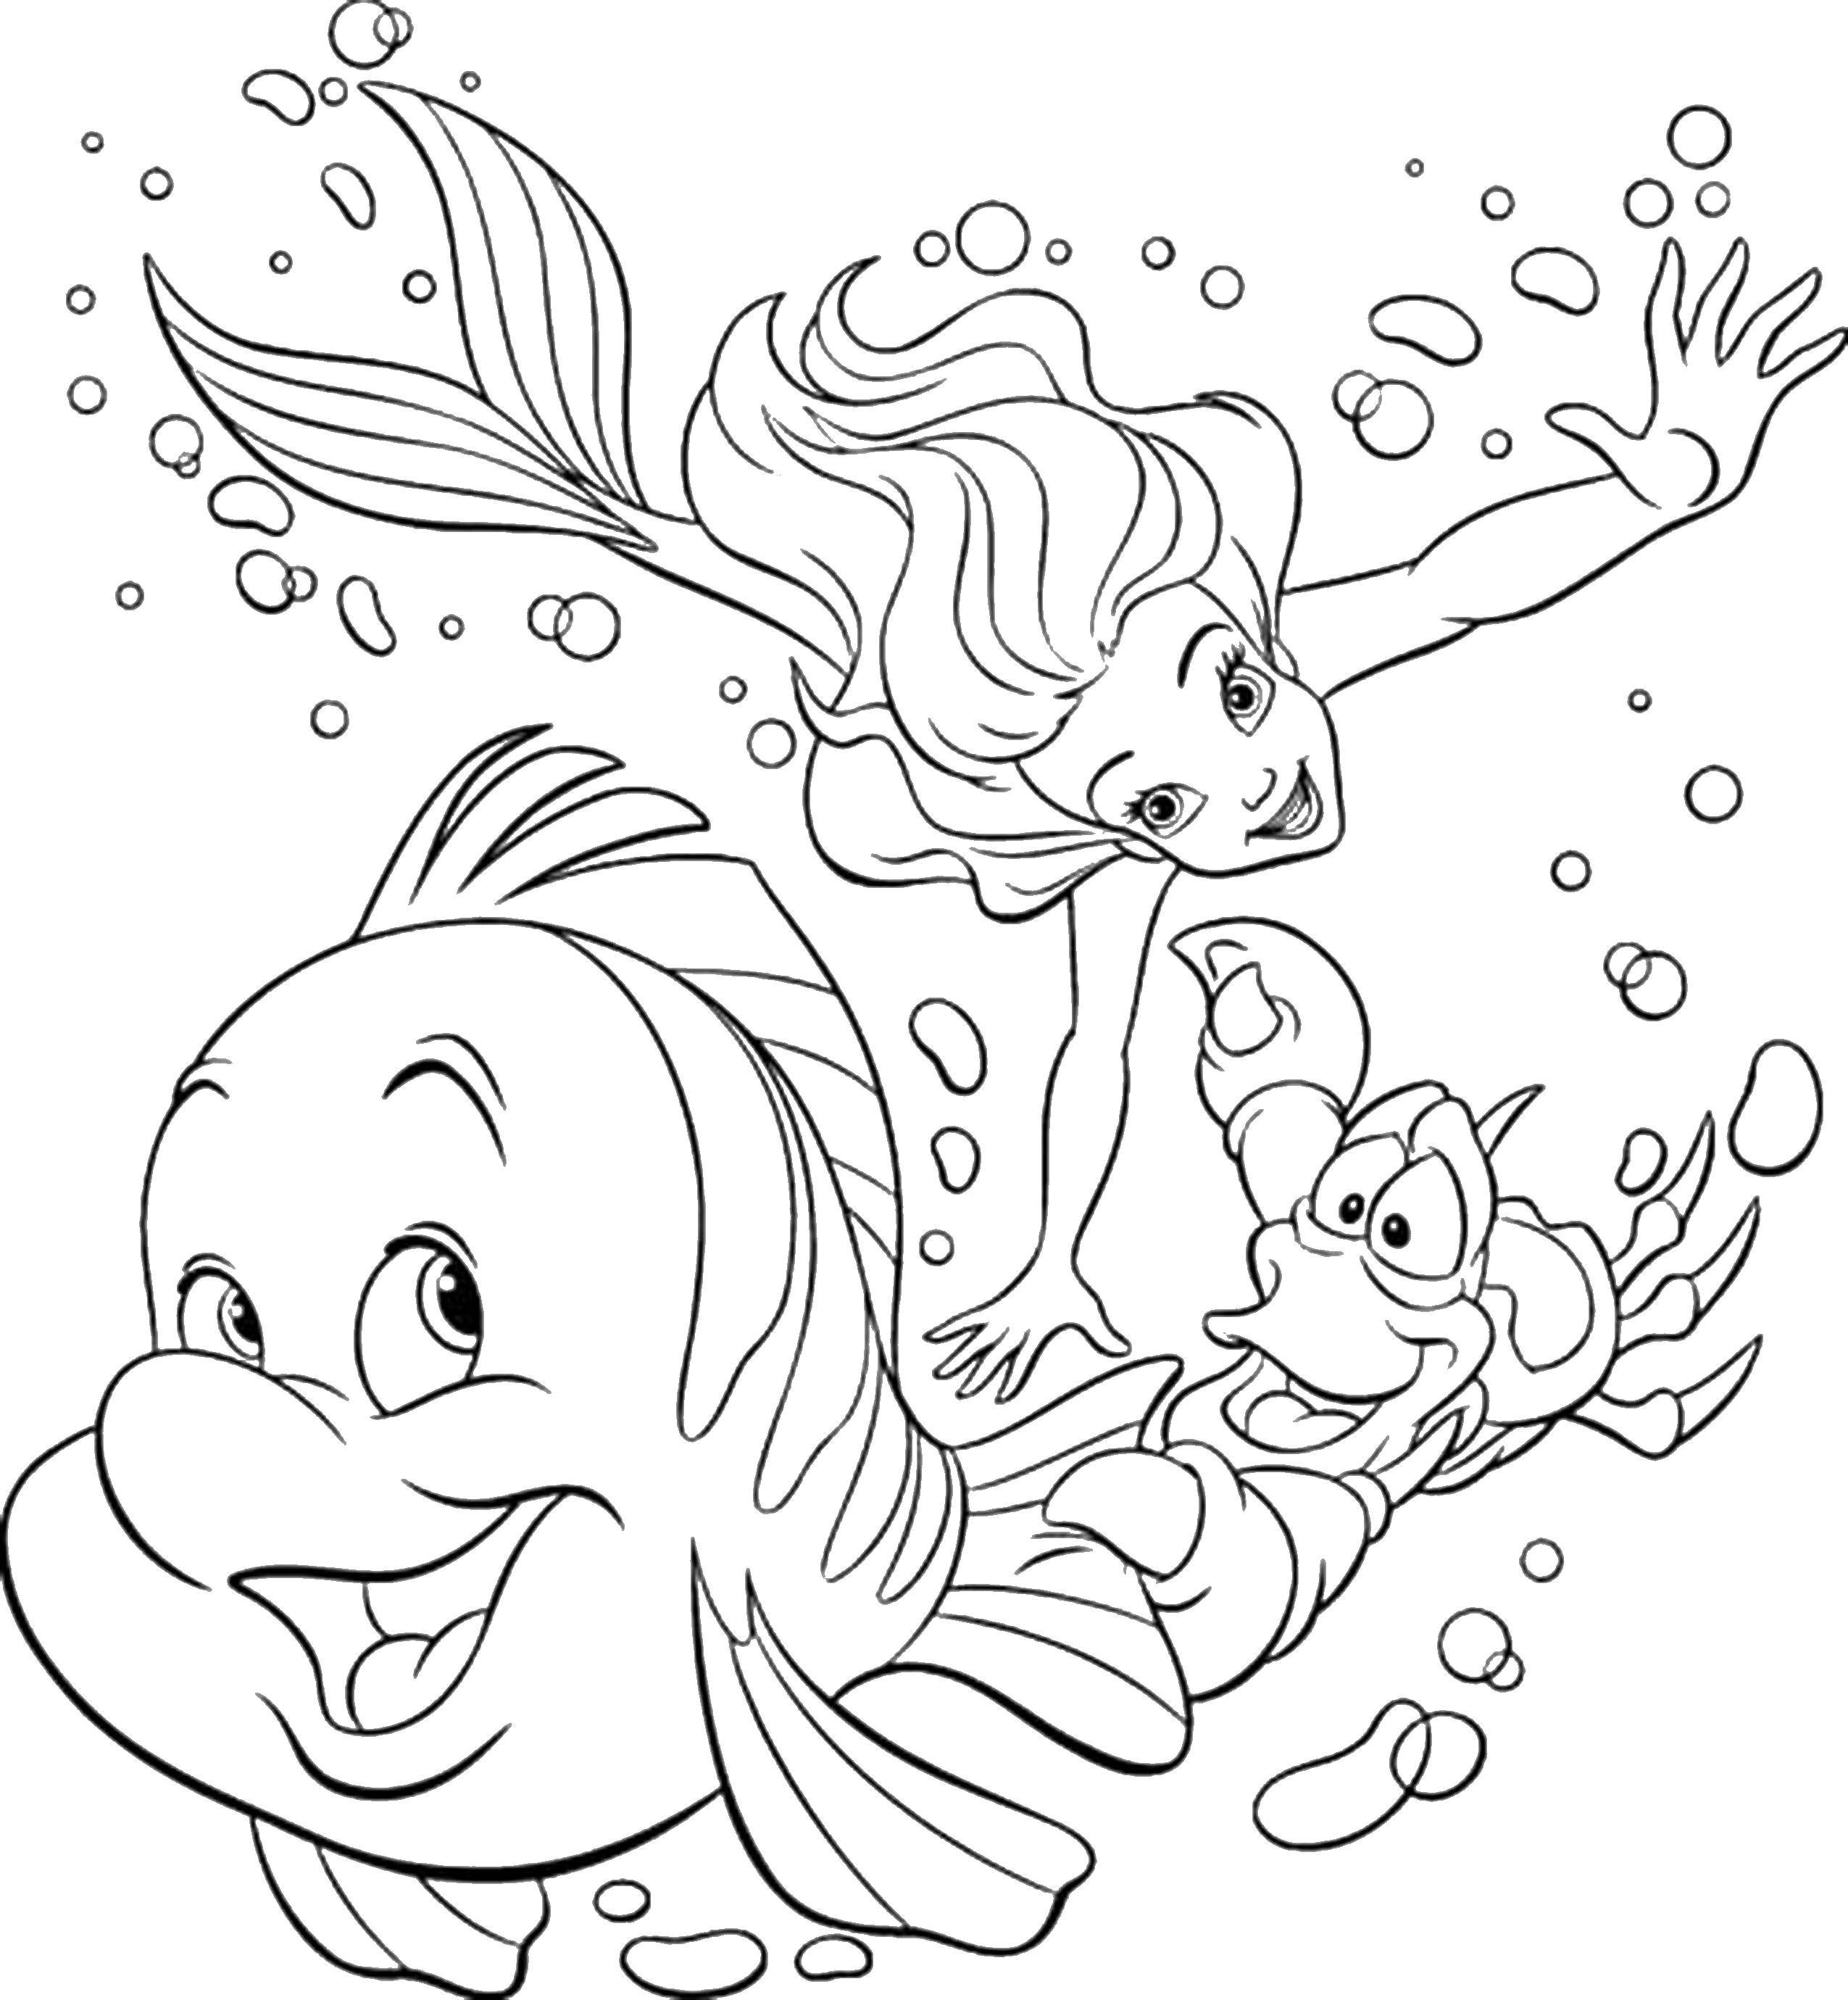 Coloring Playing catch-up. Category Disney coloring pages. Tags:  Disney, the little mermaid, Ariel.